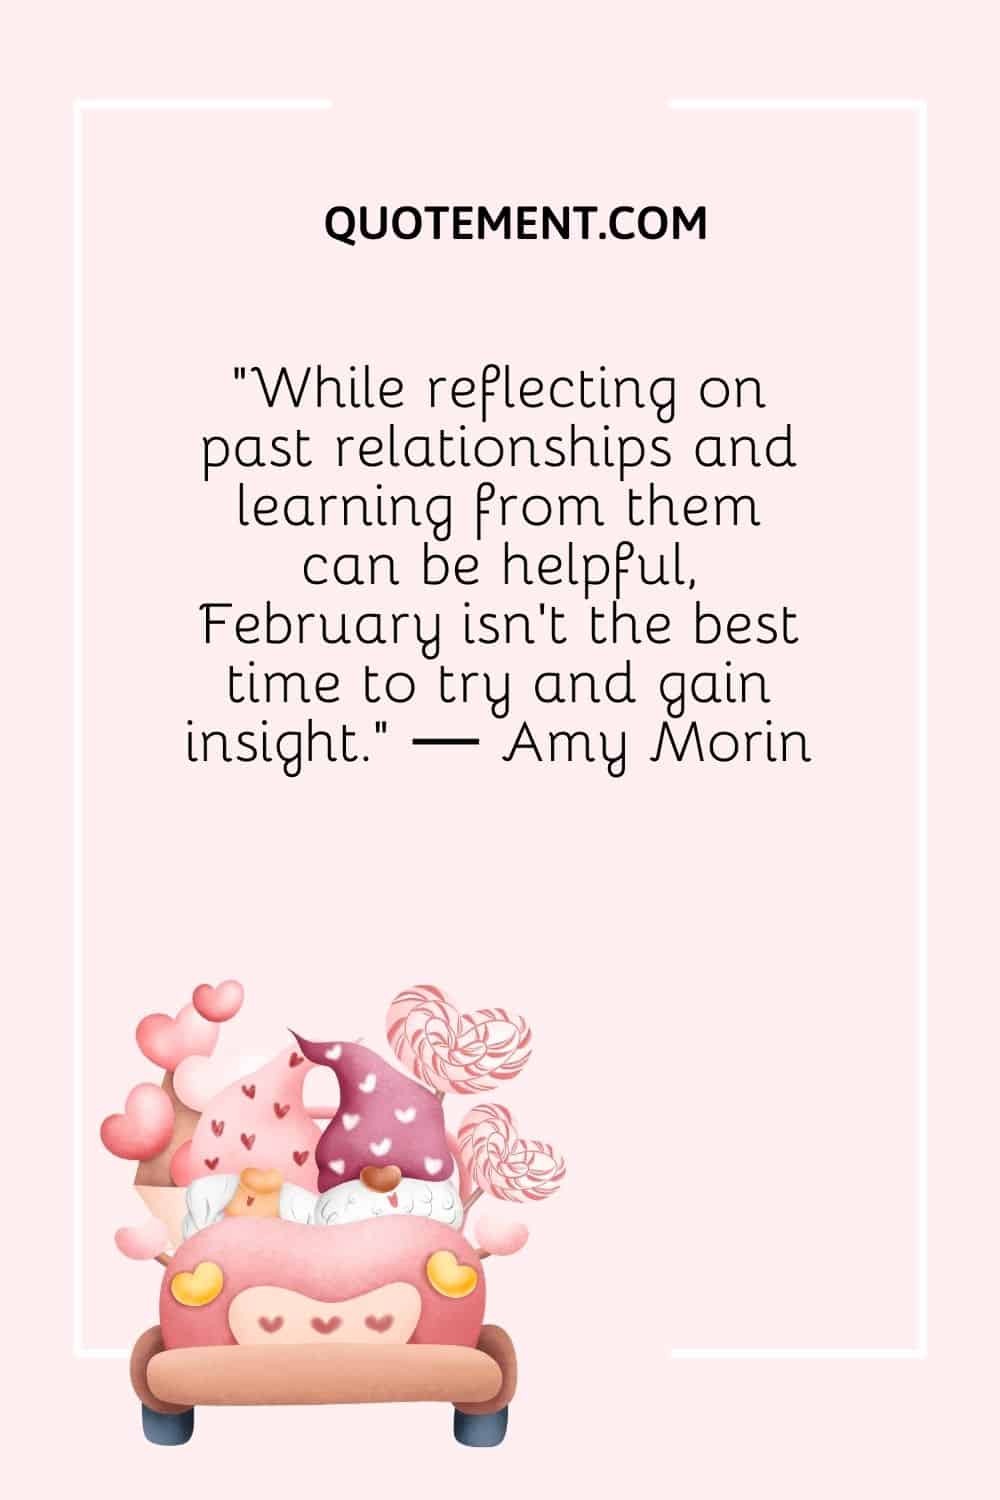 “While reflecting on past relationships and learning from them can be helpful, February isn’t the best time to try and gain insight.” ― Amy Morin